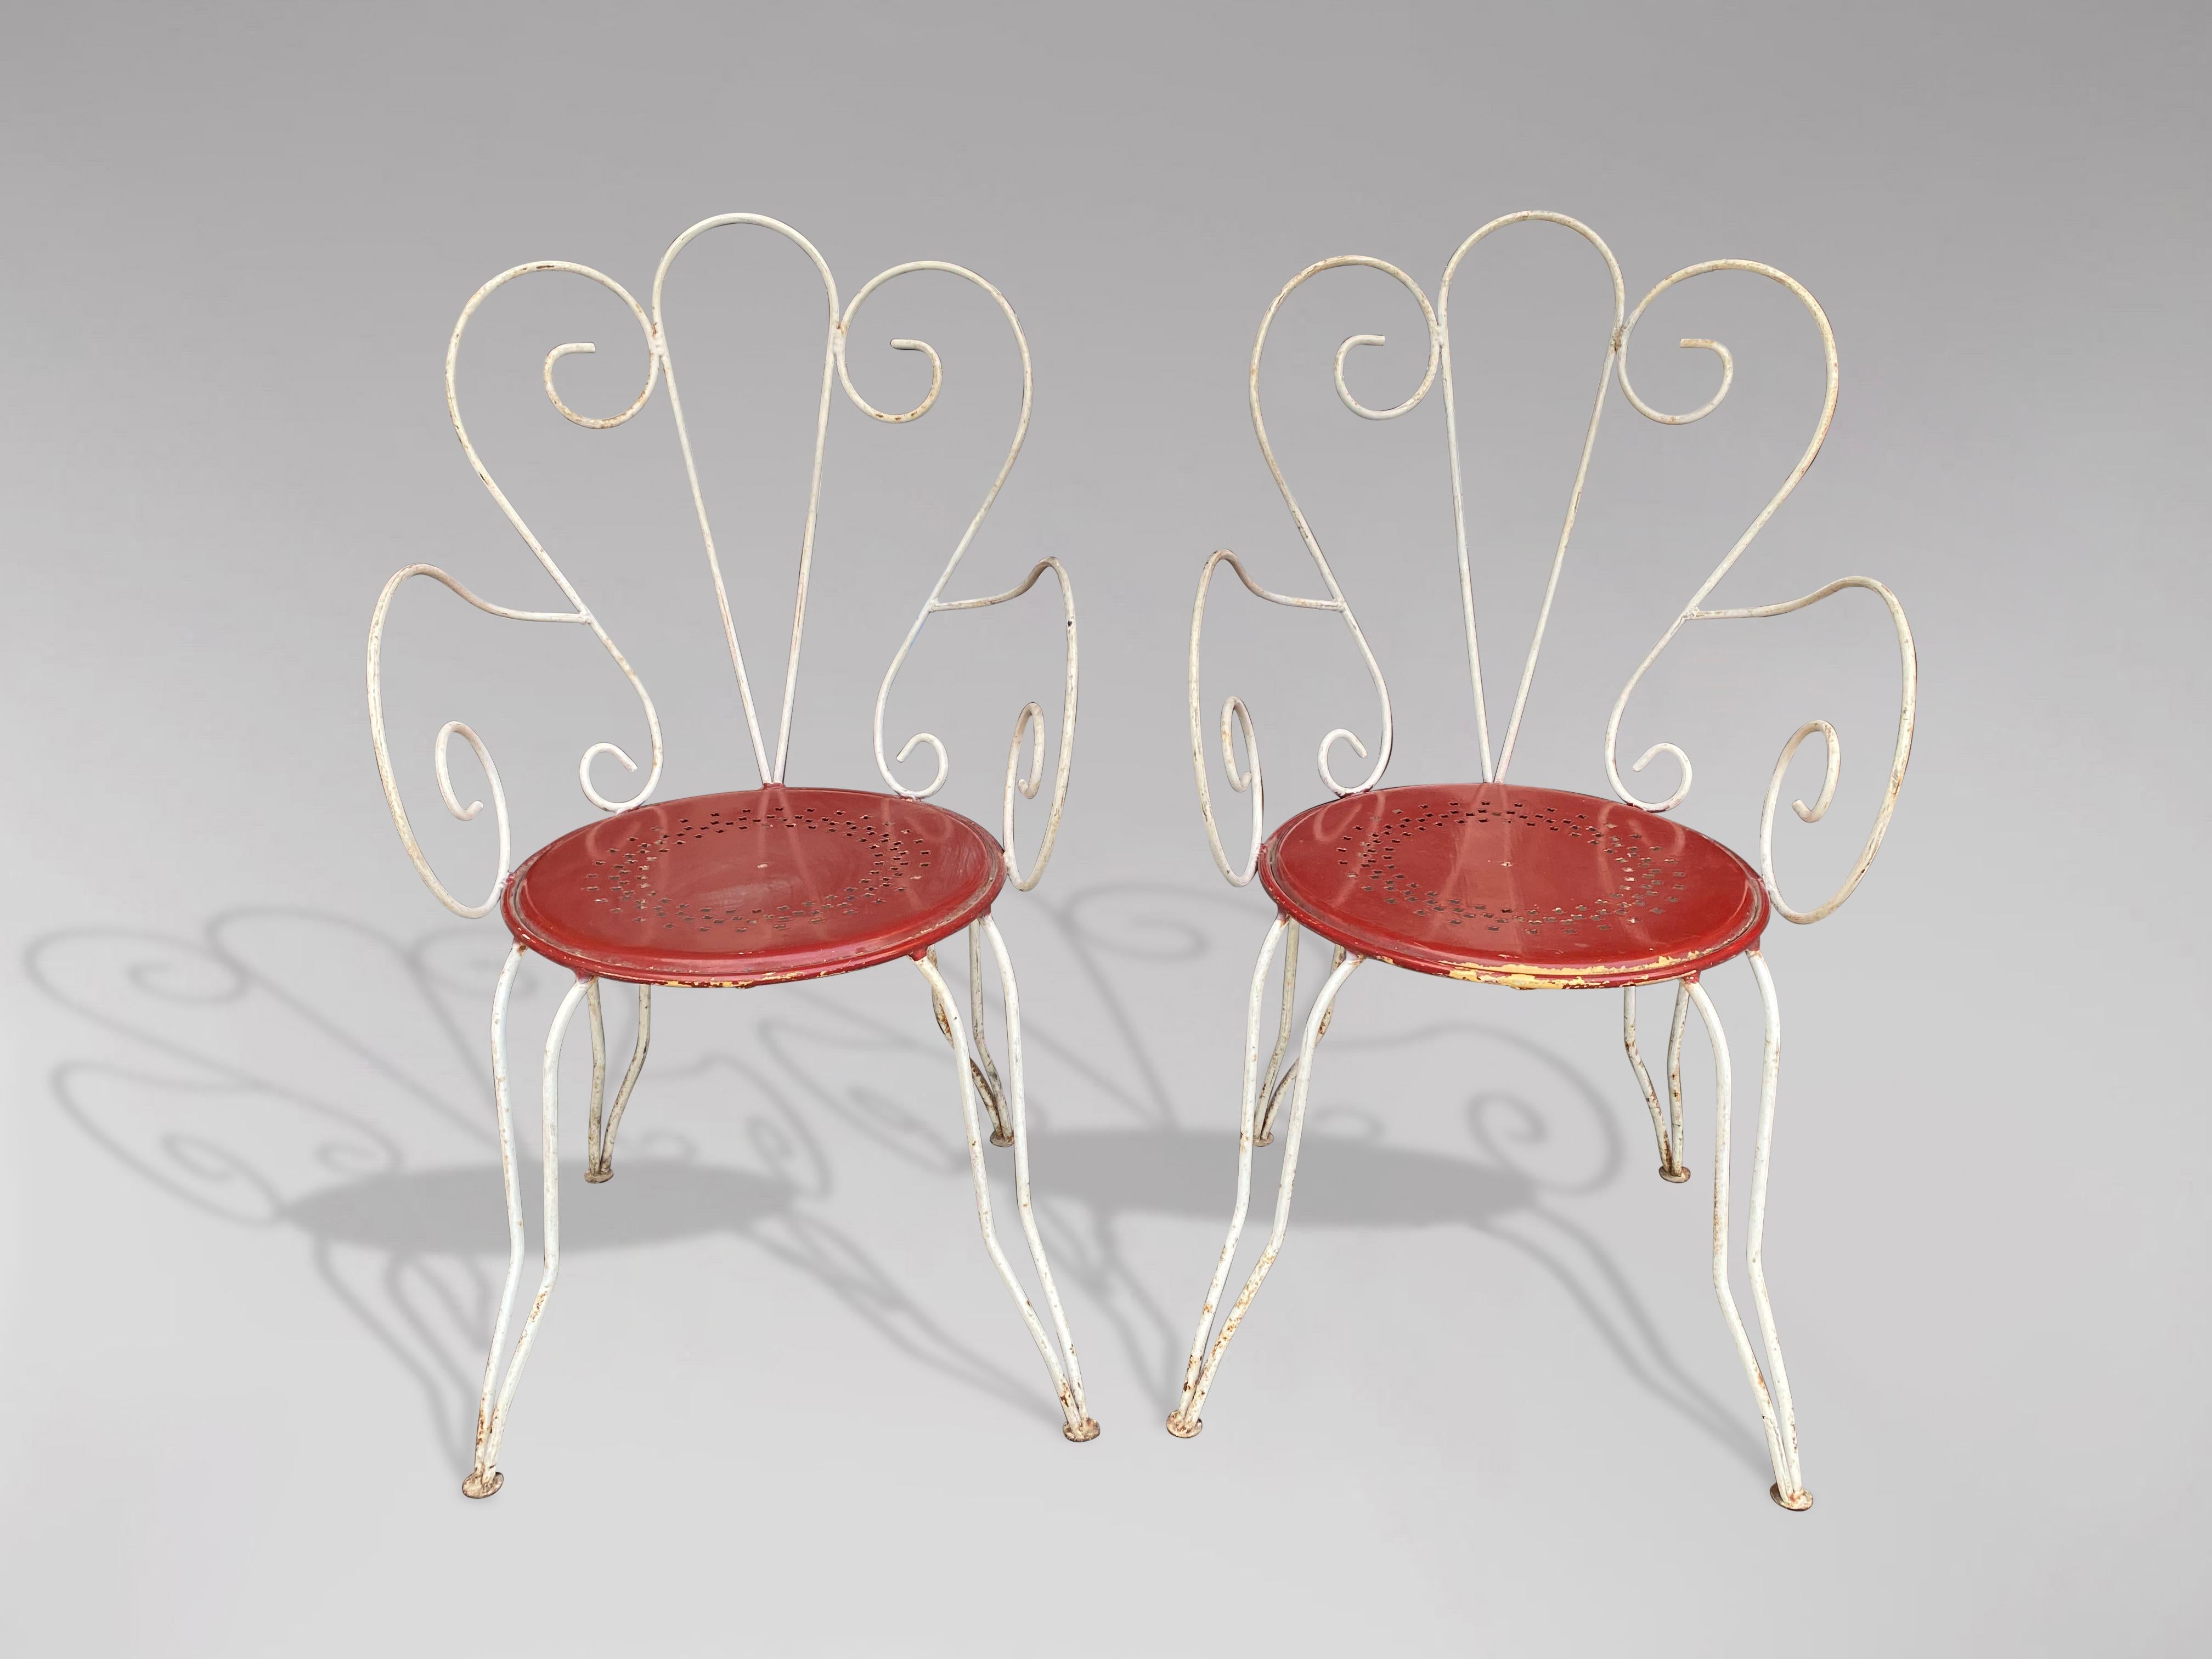 1960s French Riviera Painted Metal Garden Set Table and Chairs For Sale 2